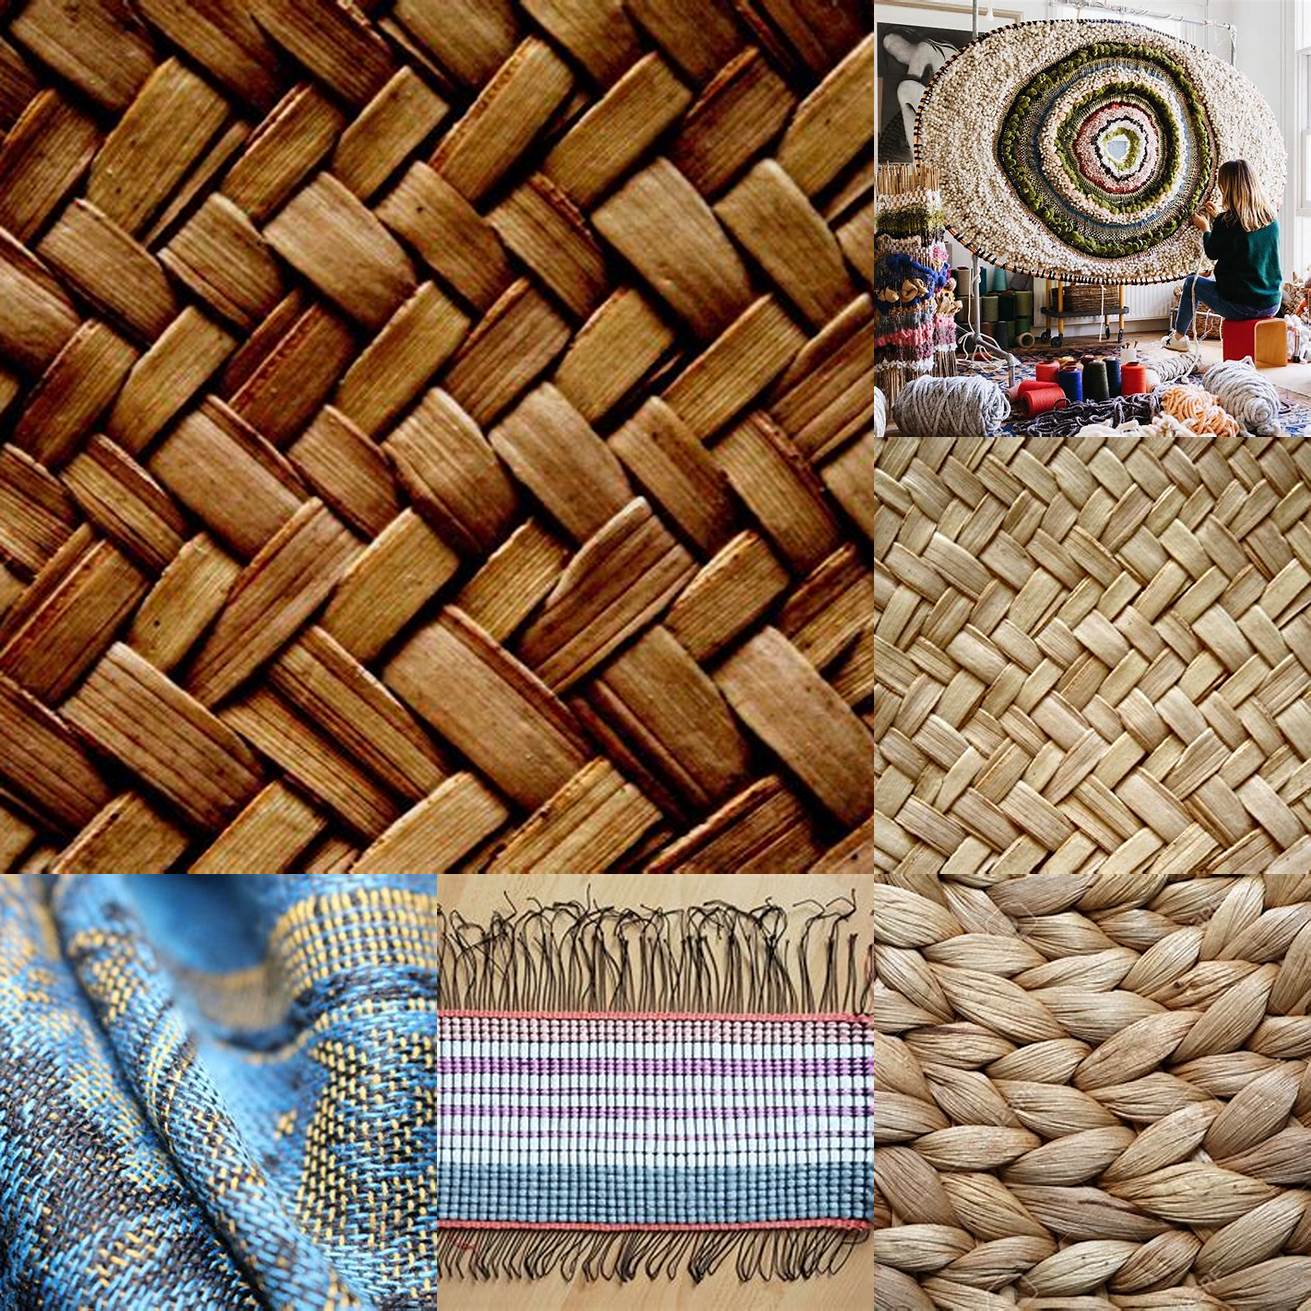 Incorporate natural materials such as woven textiles to add texture